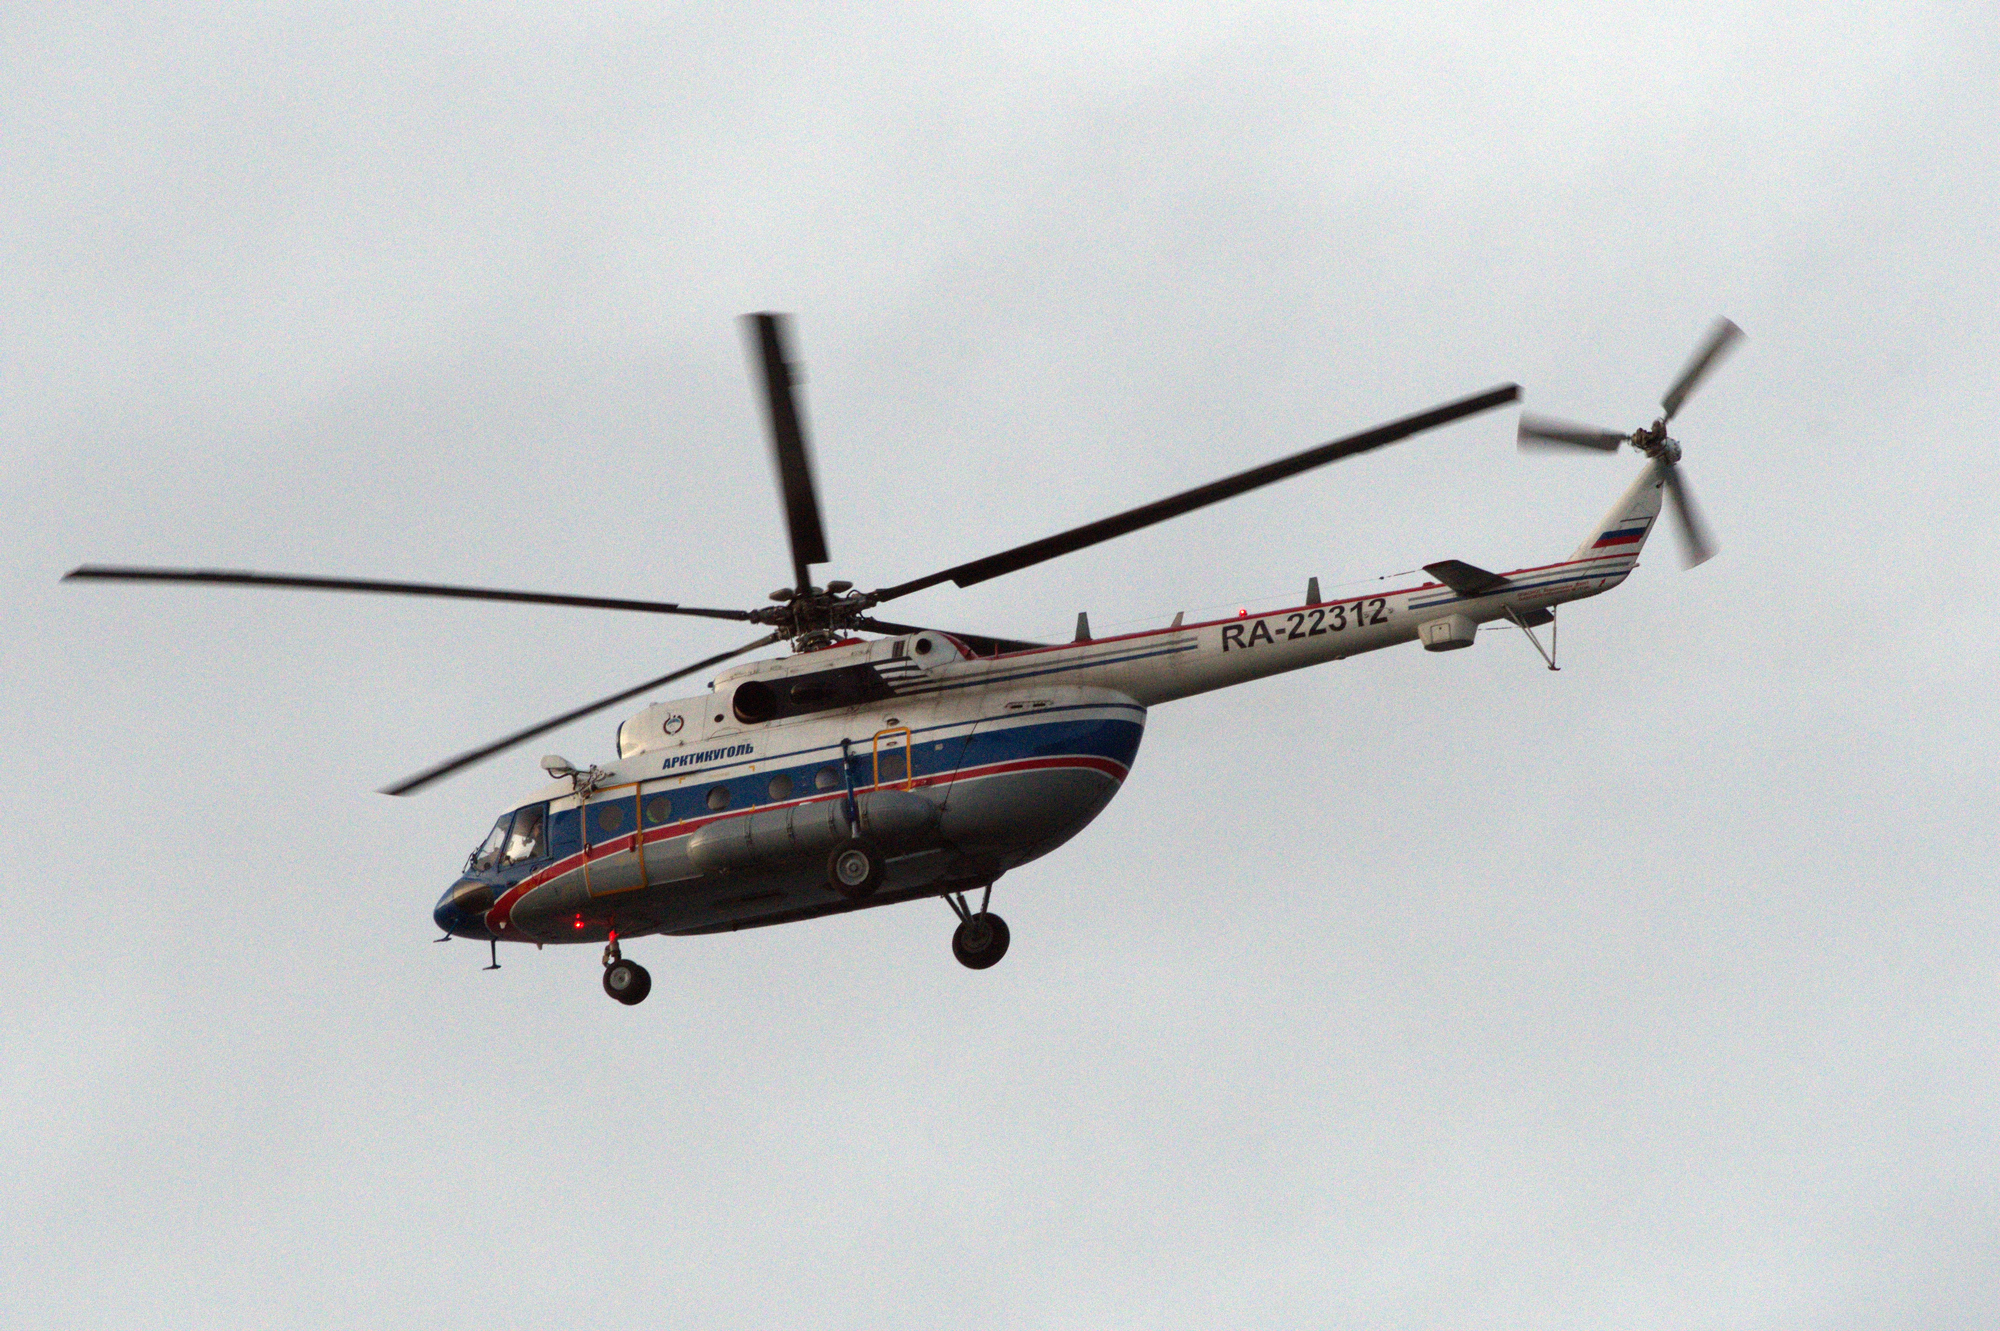 Russian helicopter down over Norwegian archipelago | The Independent ...